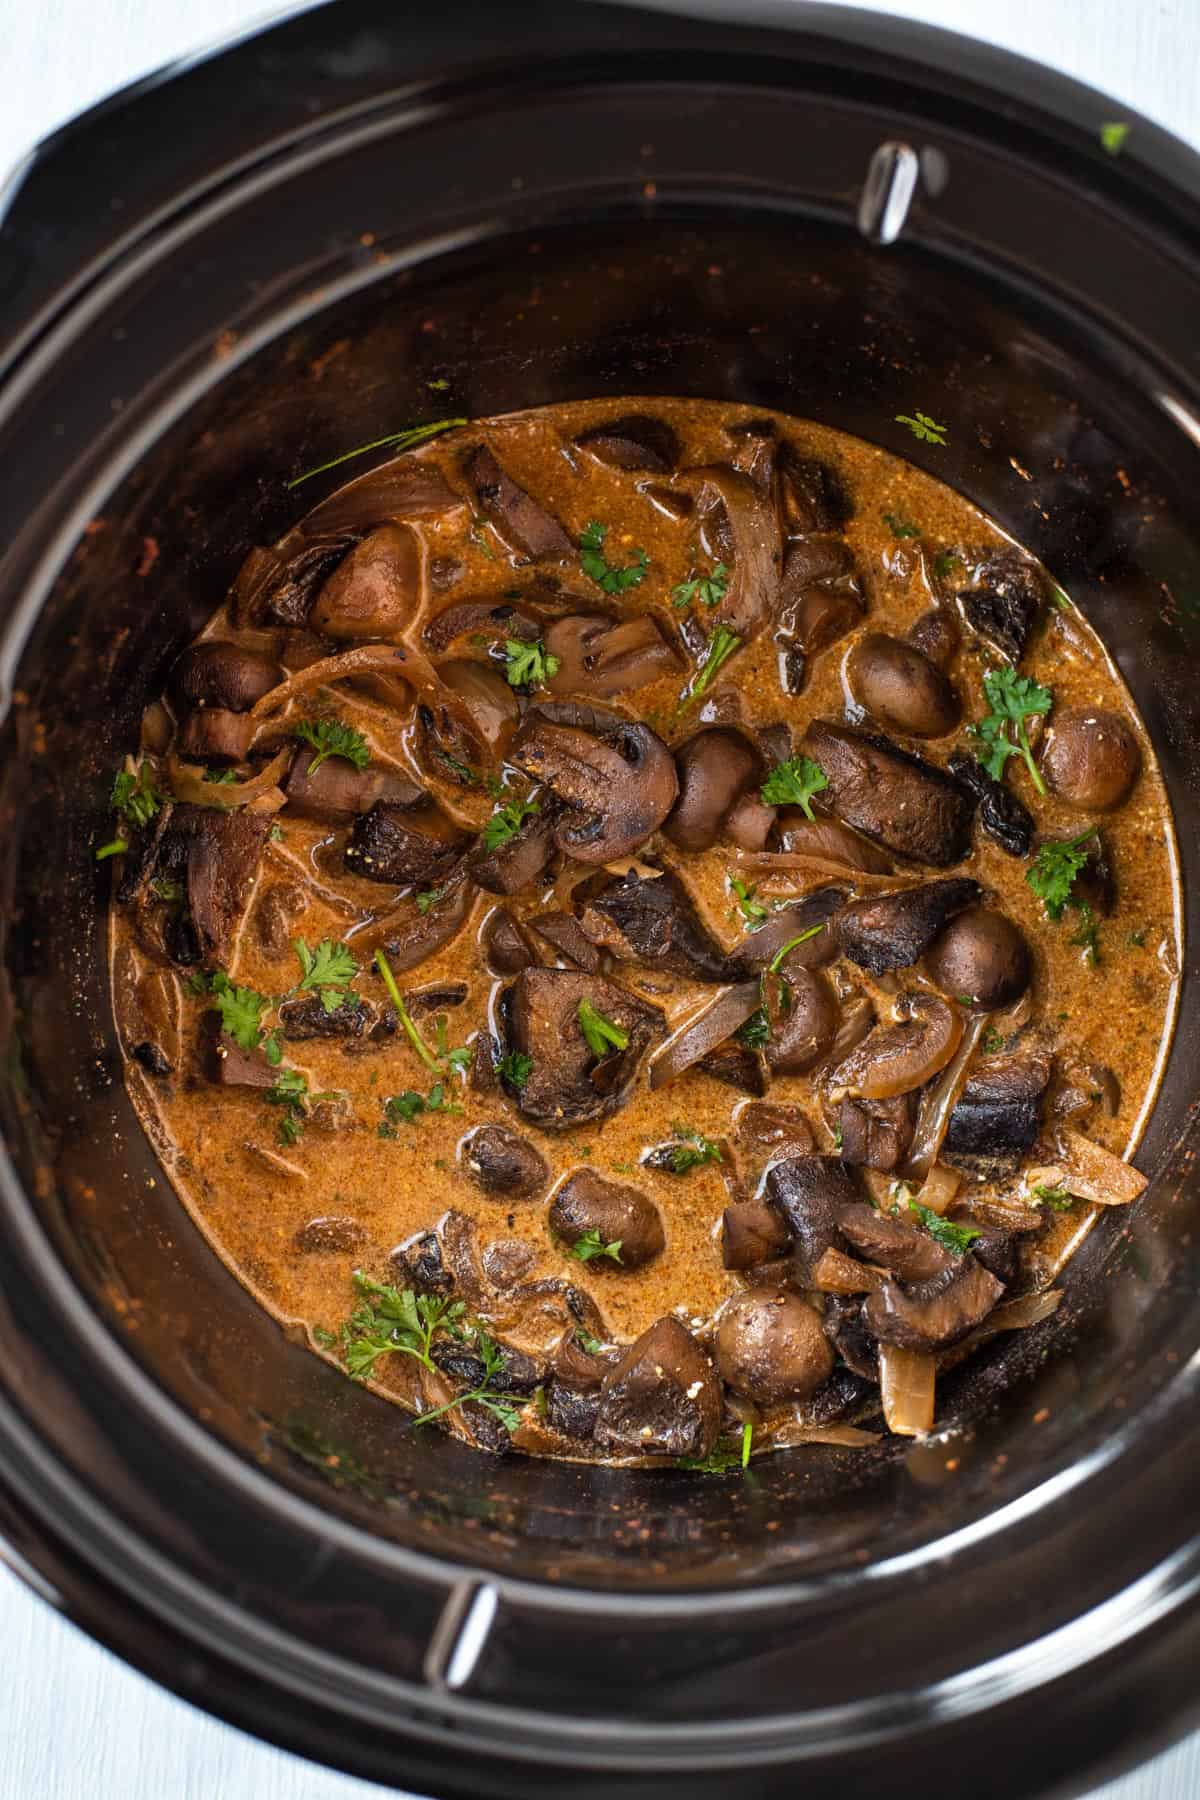 Mushroom stroganoff in a slow cooker with fresh parsley.